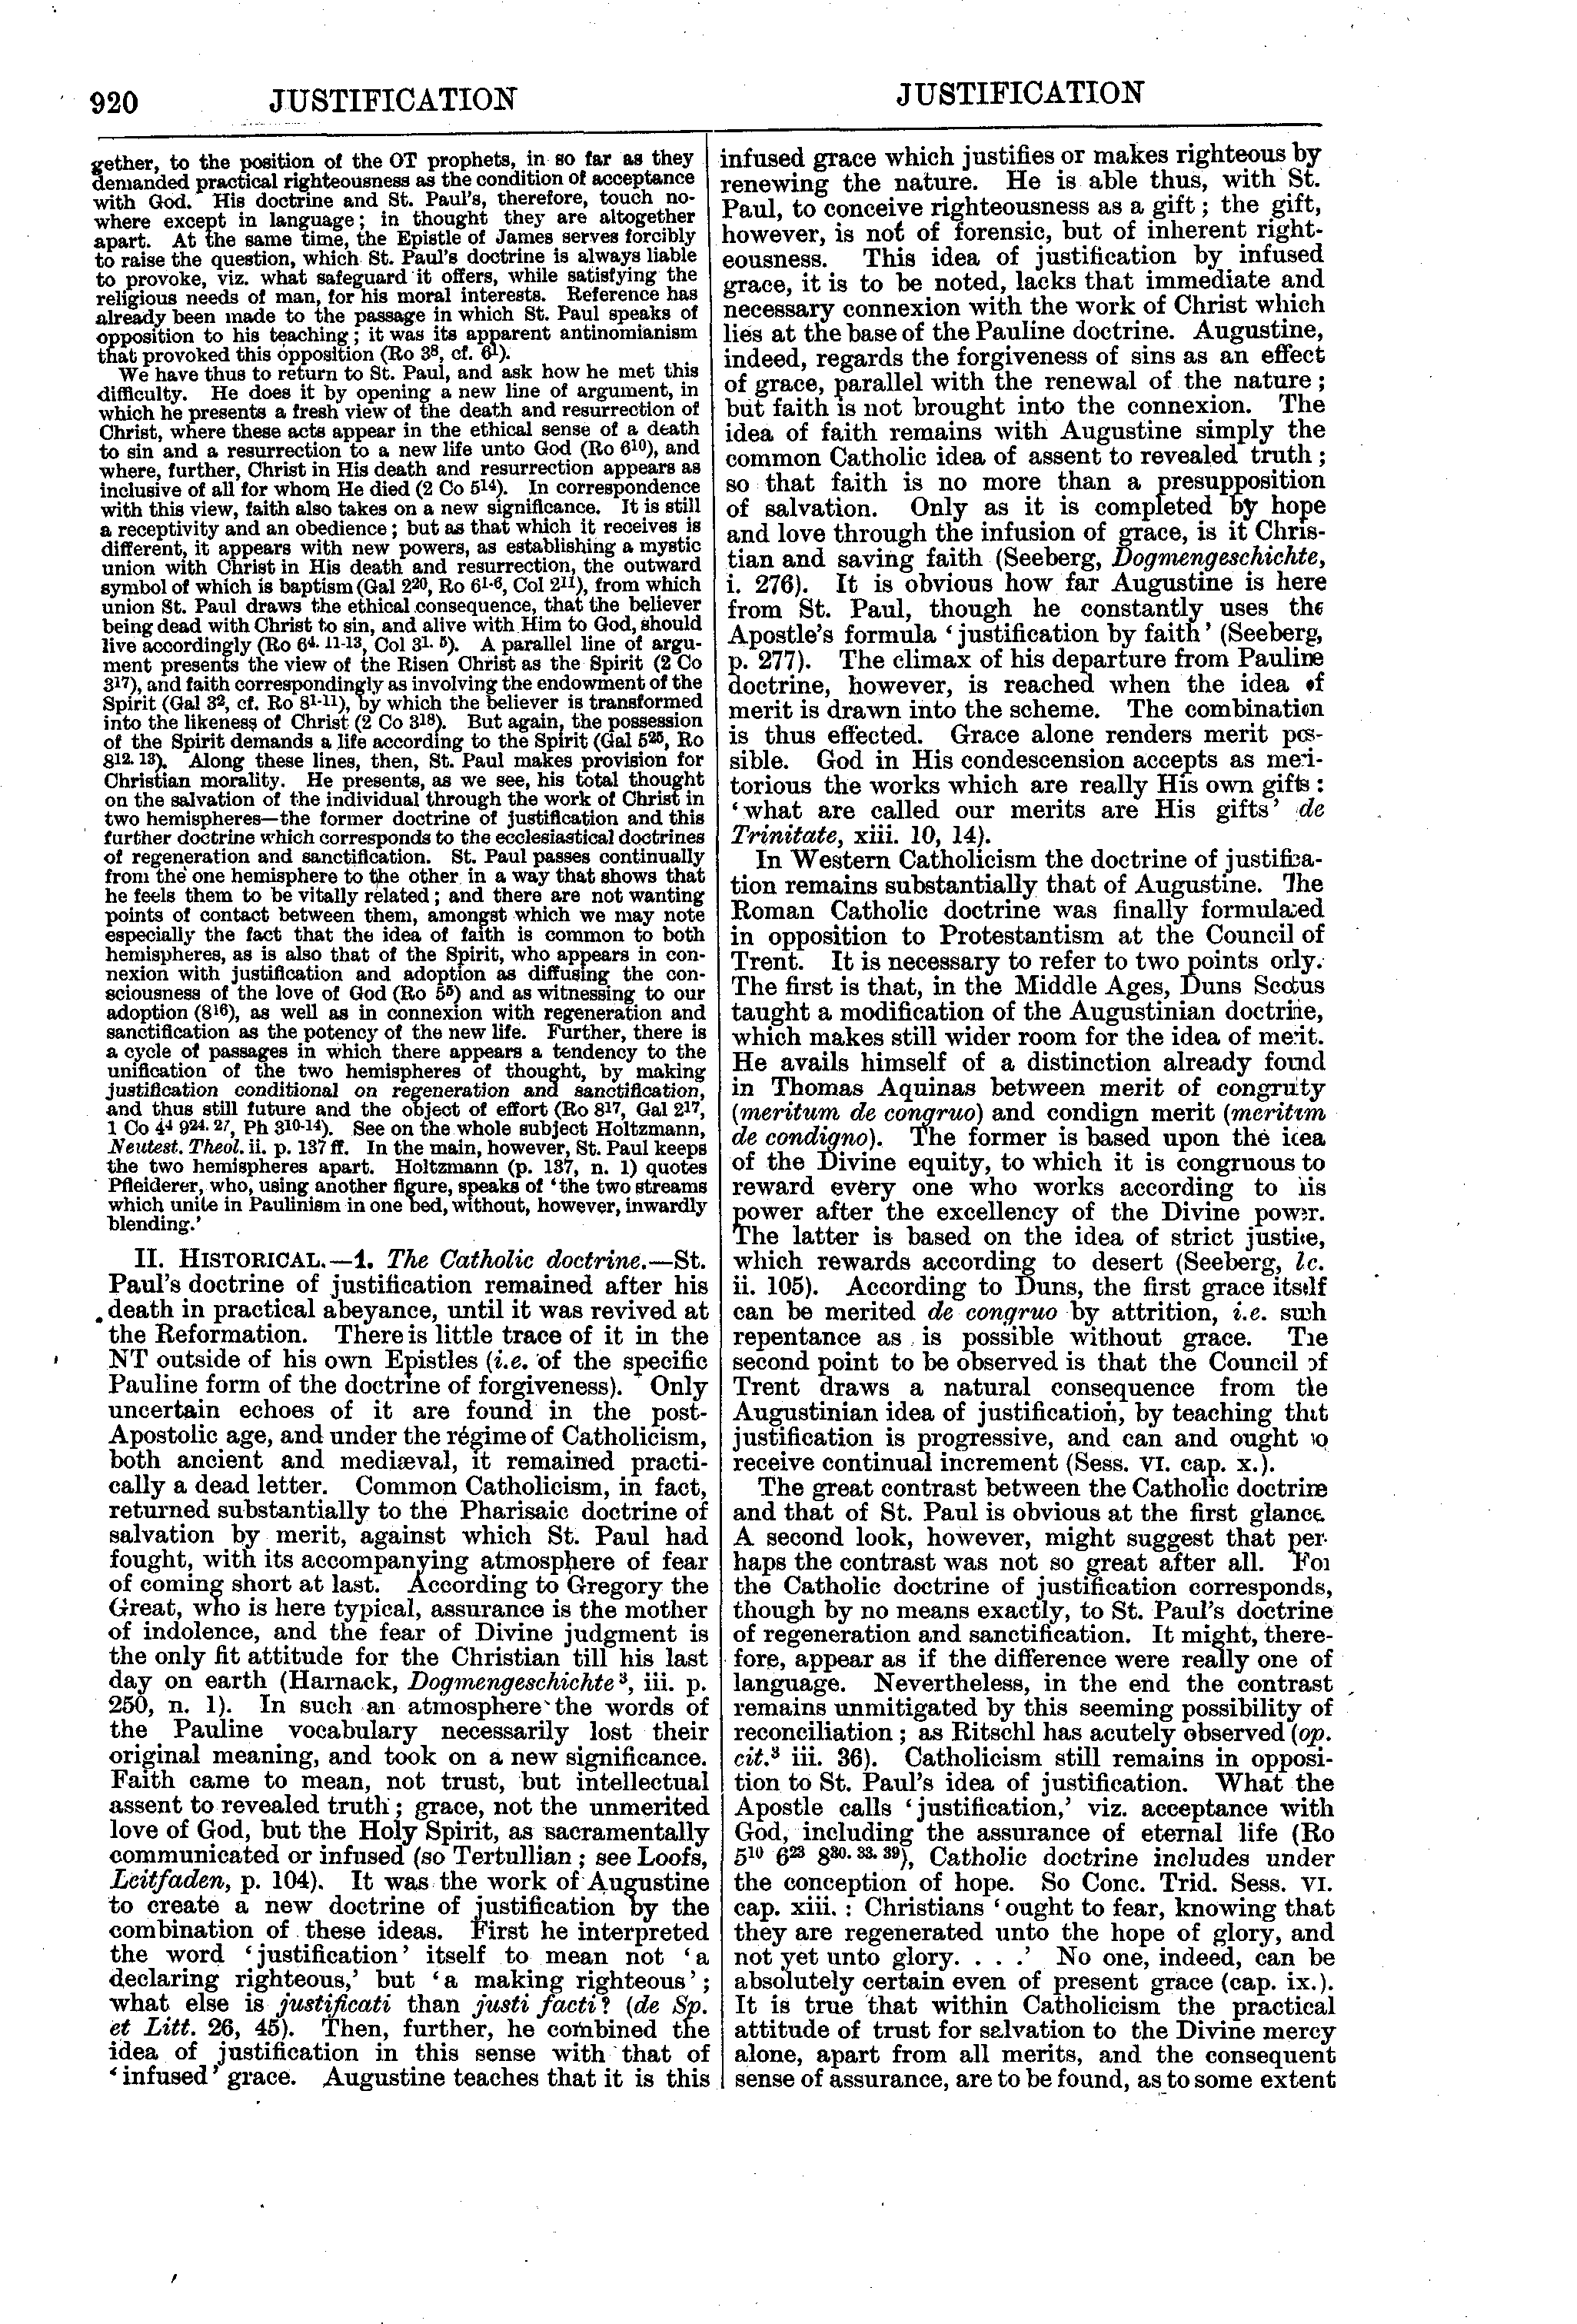 Image of page 920